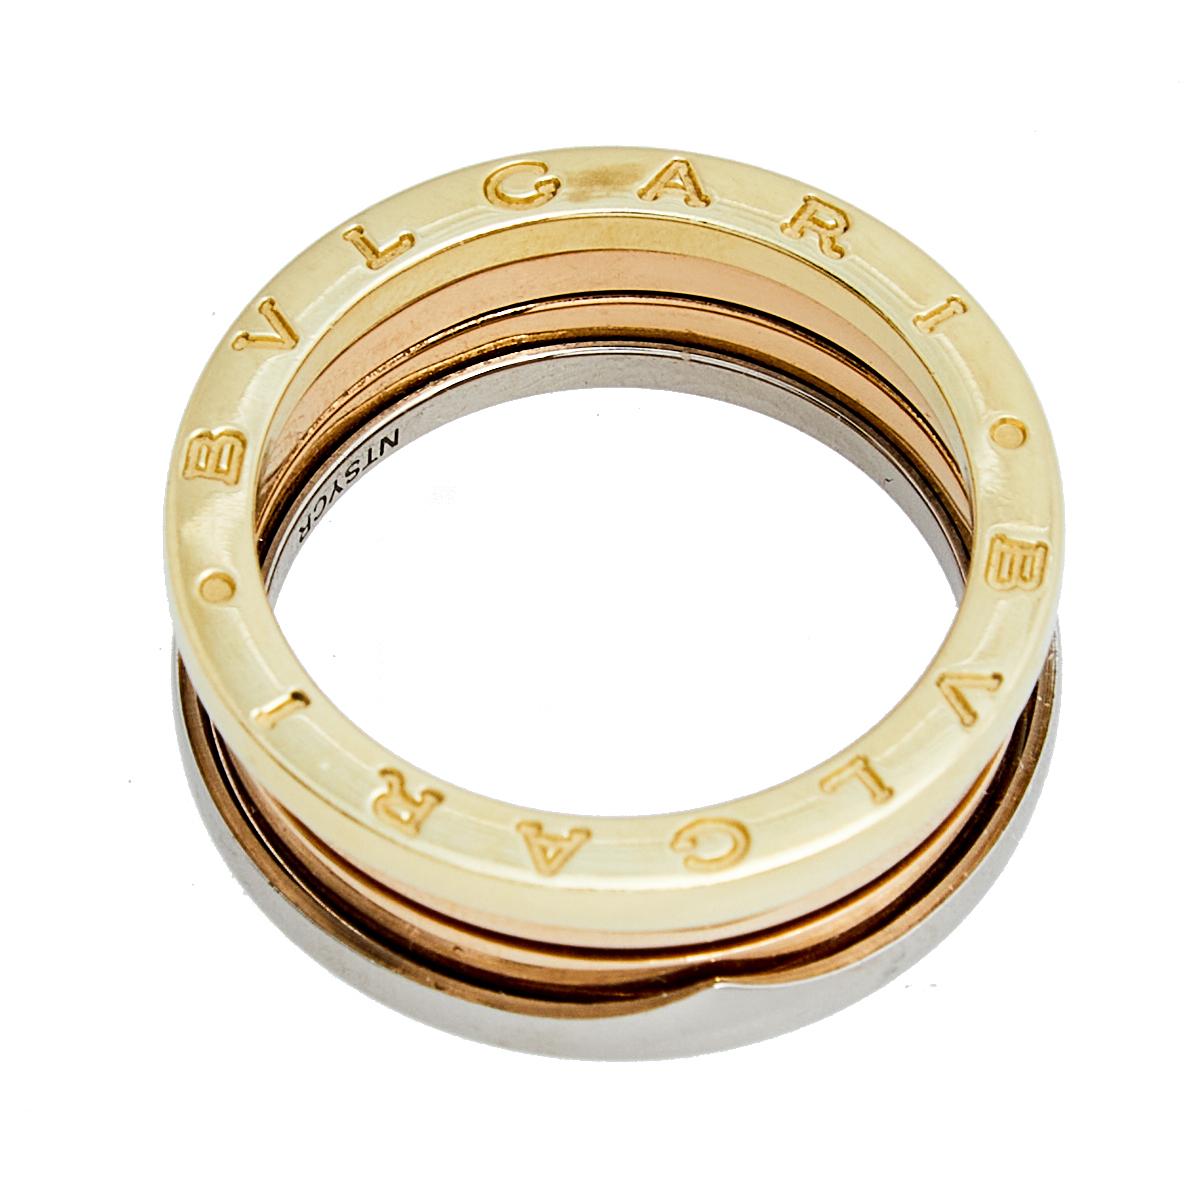 For the woman who has a refined taste in fine jewelry, Bvlgari brings her this immaculately crafted ring that has been made to be praised. The ring has a rather modern style of bands in 18k three-tone gold. It is a beautiful creation you deserve to